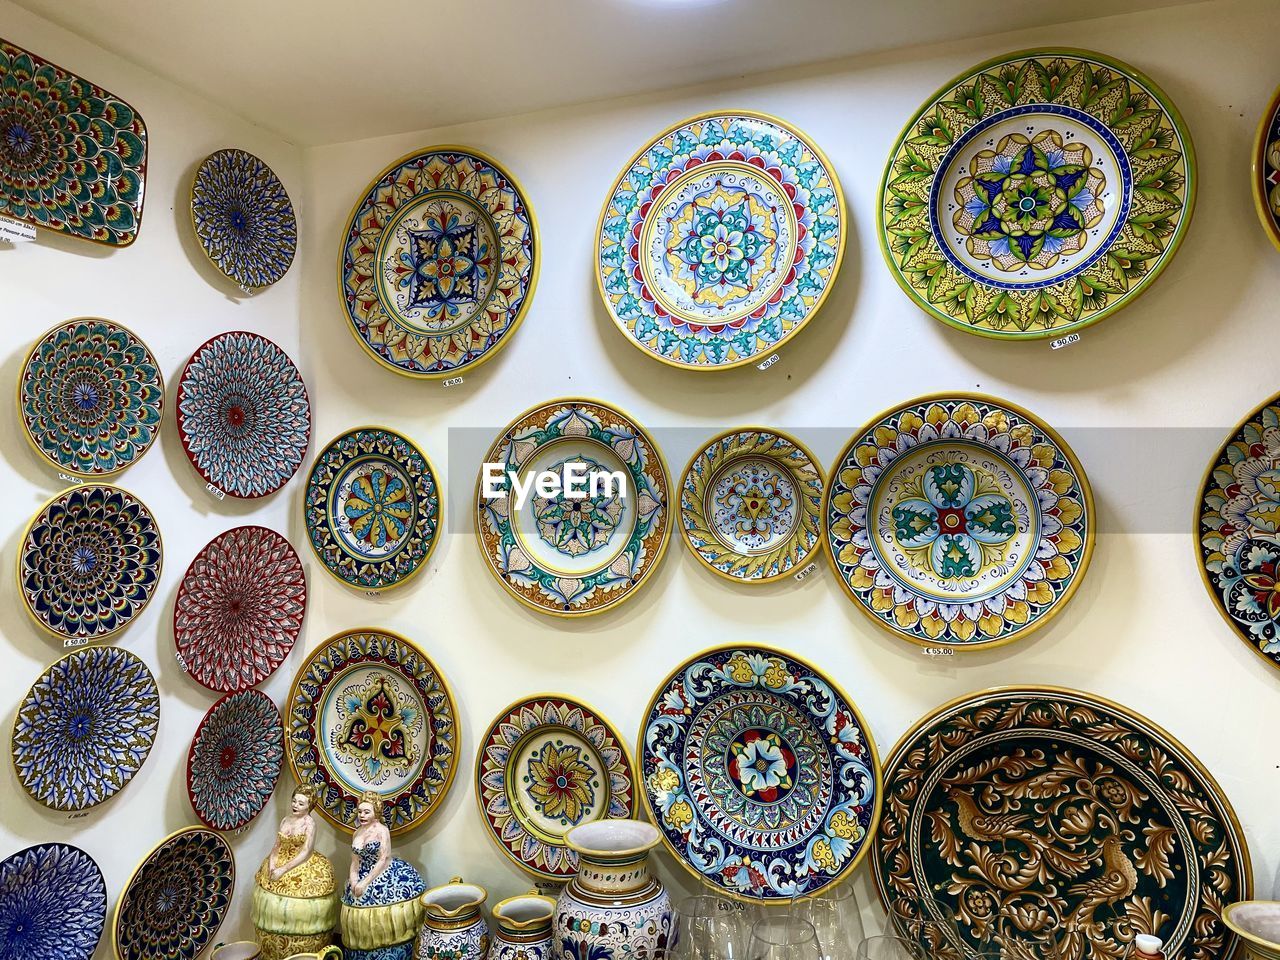 CLOSE-UP OF MULTI COLORED OBJECTS FOR SALE IN PLATE